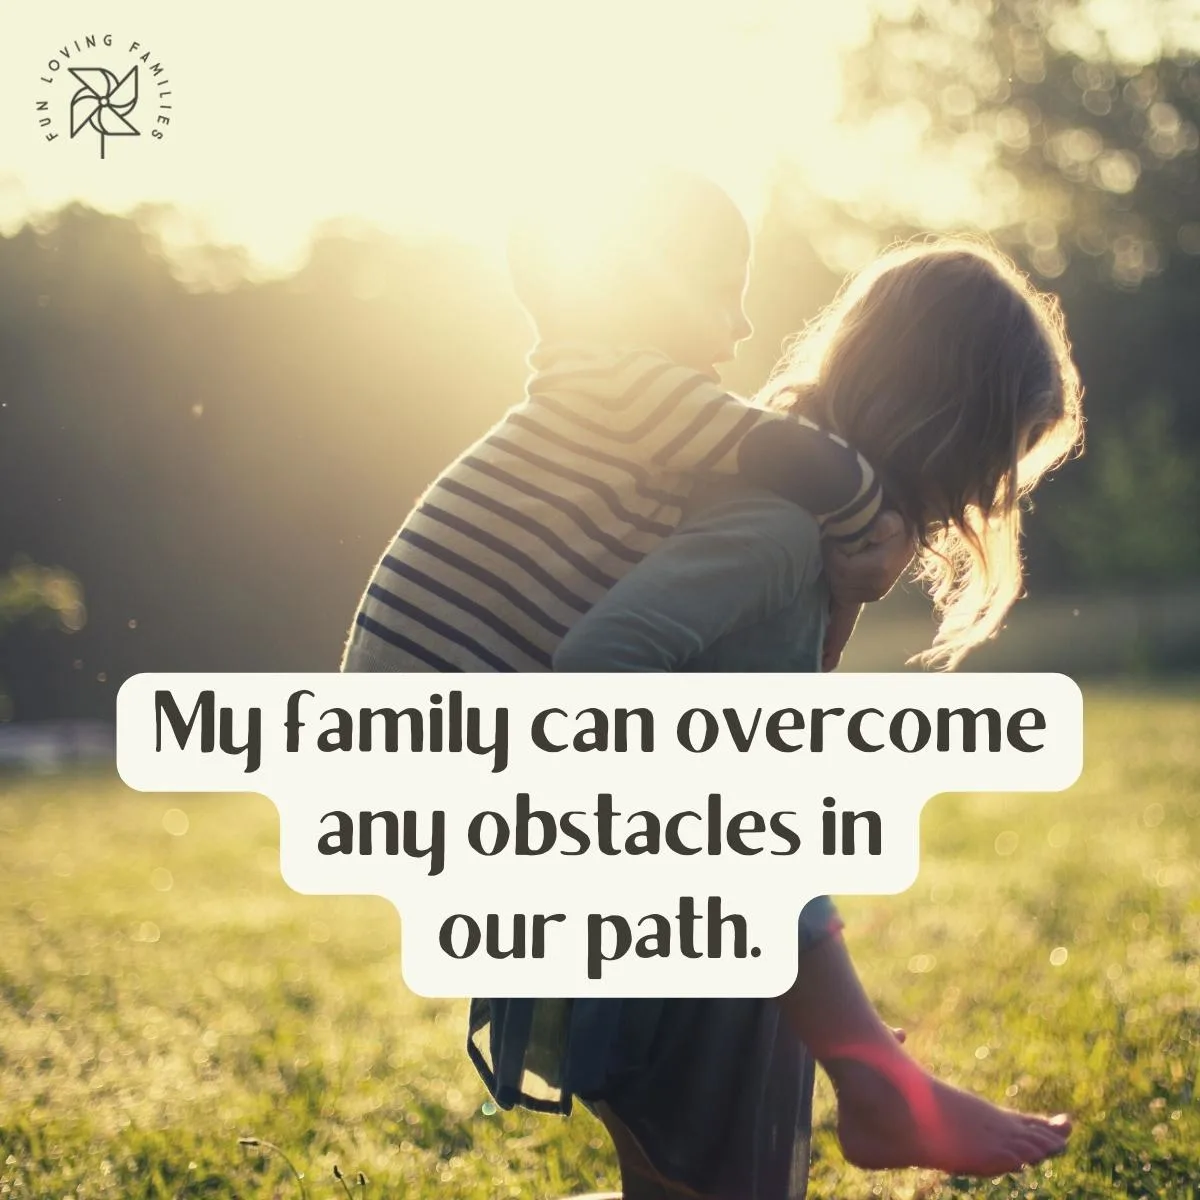 My family can overcome any obstacles in our path affirmation